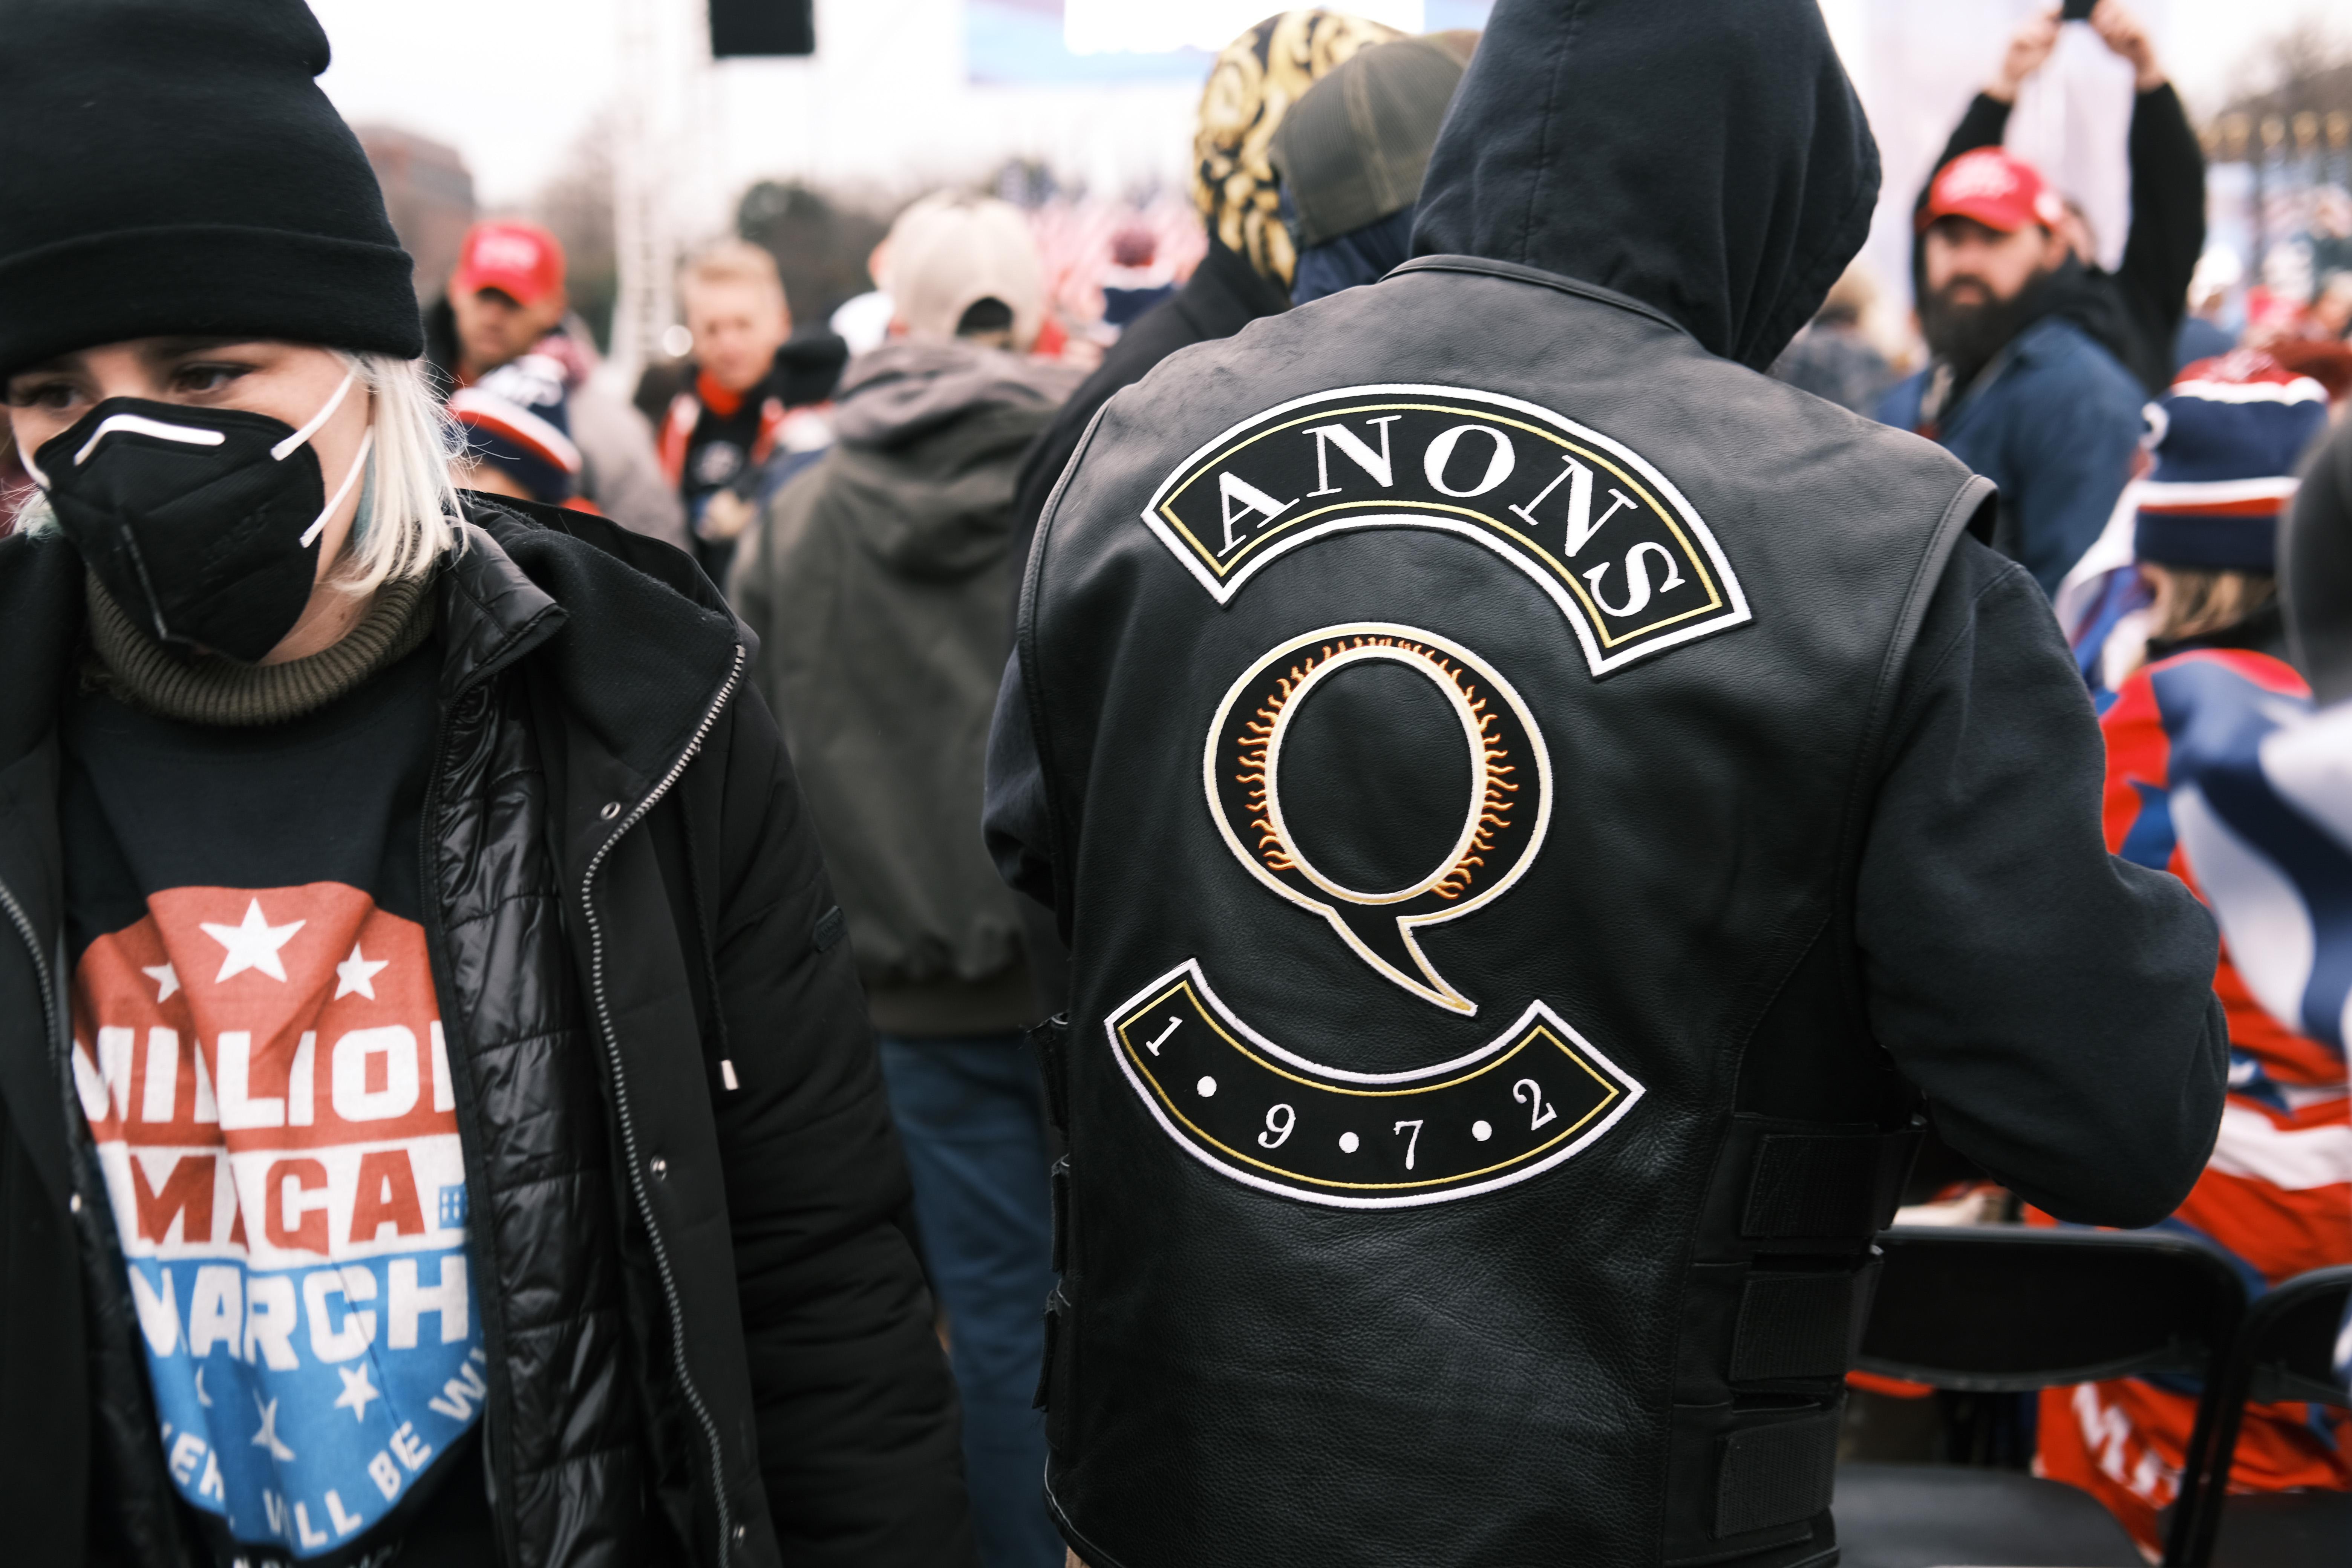 A man in a QAnon jacket at a rally.